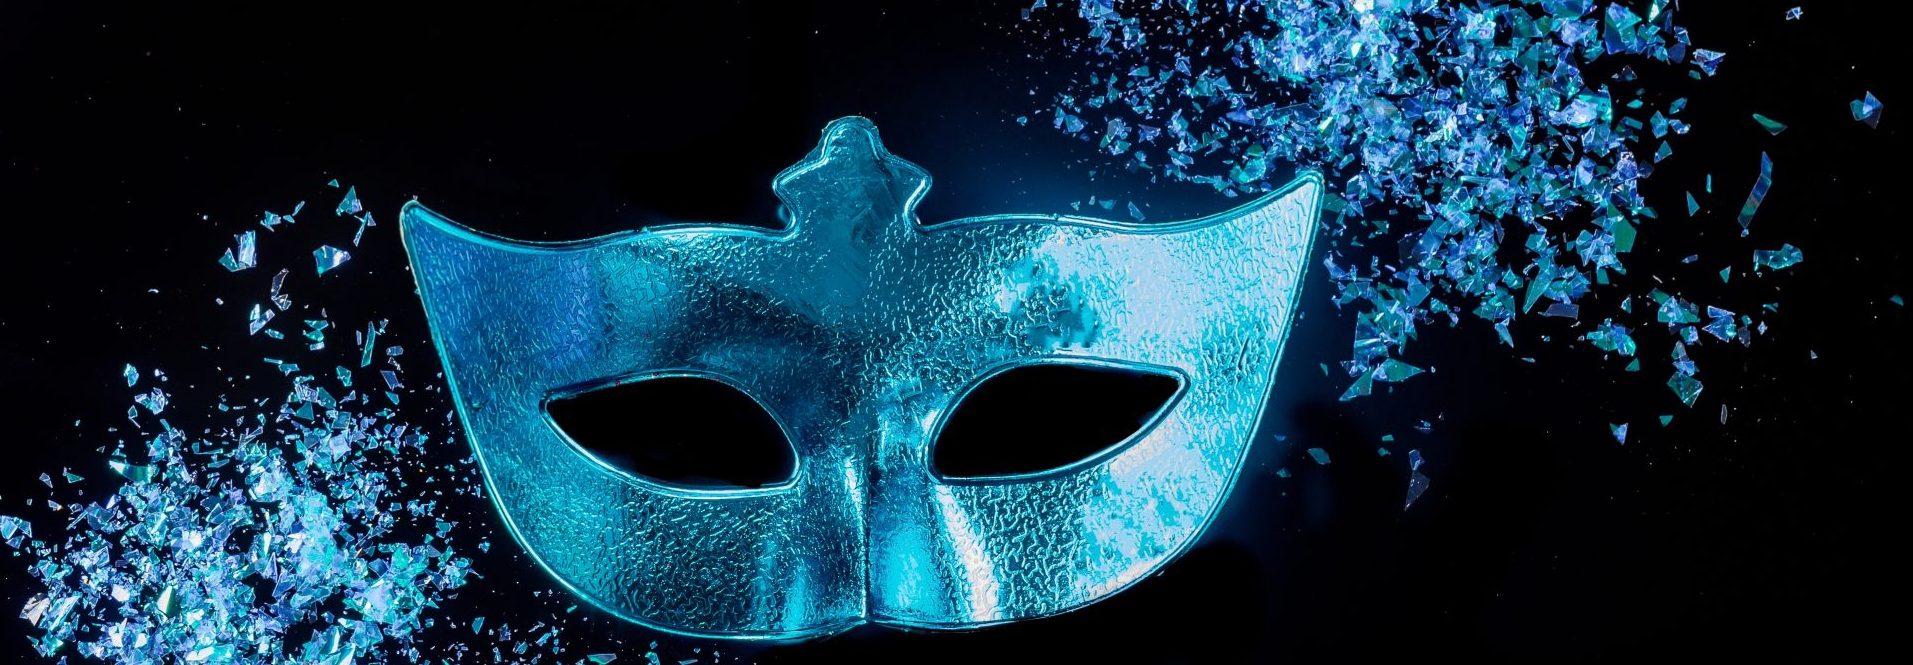 Blue carnival mask for masquerade